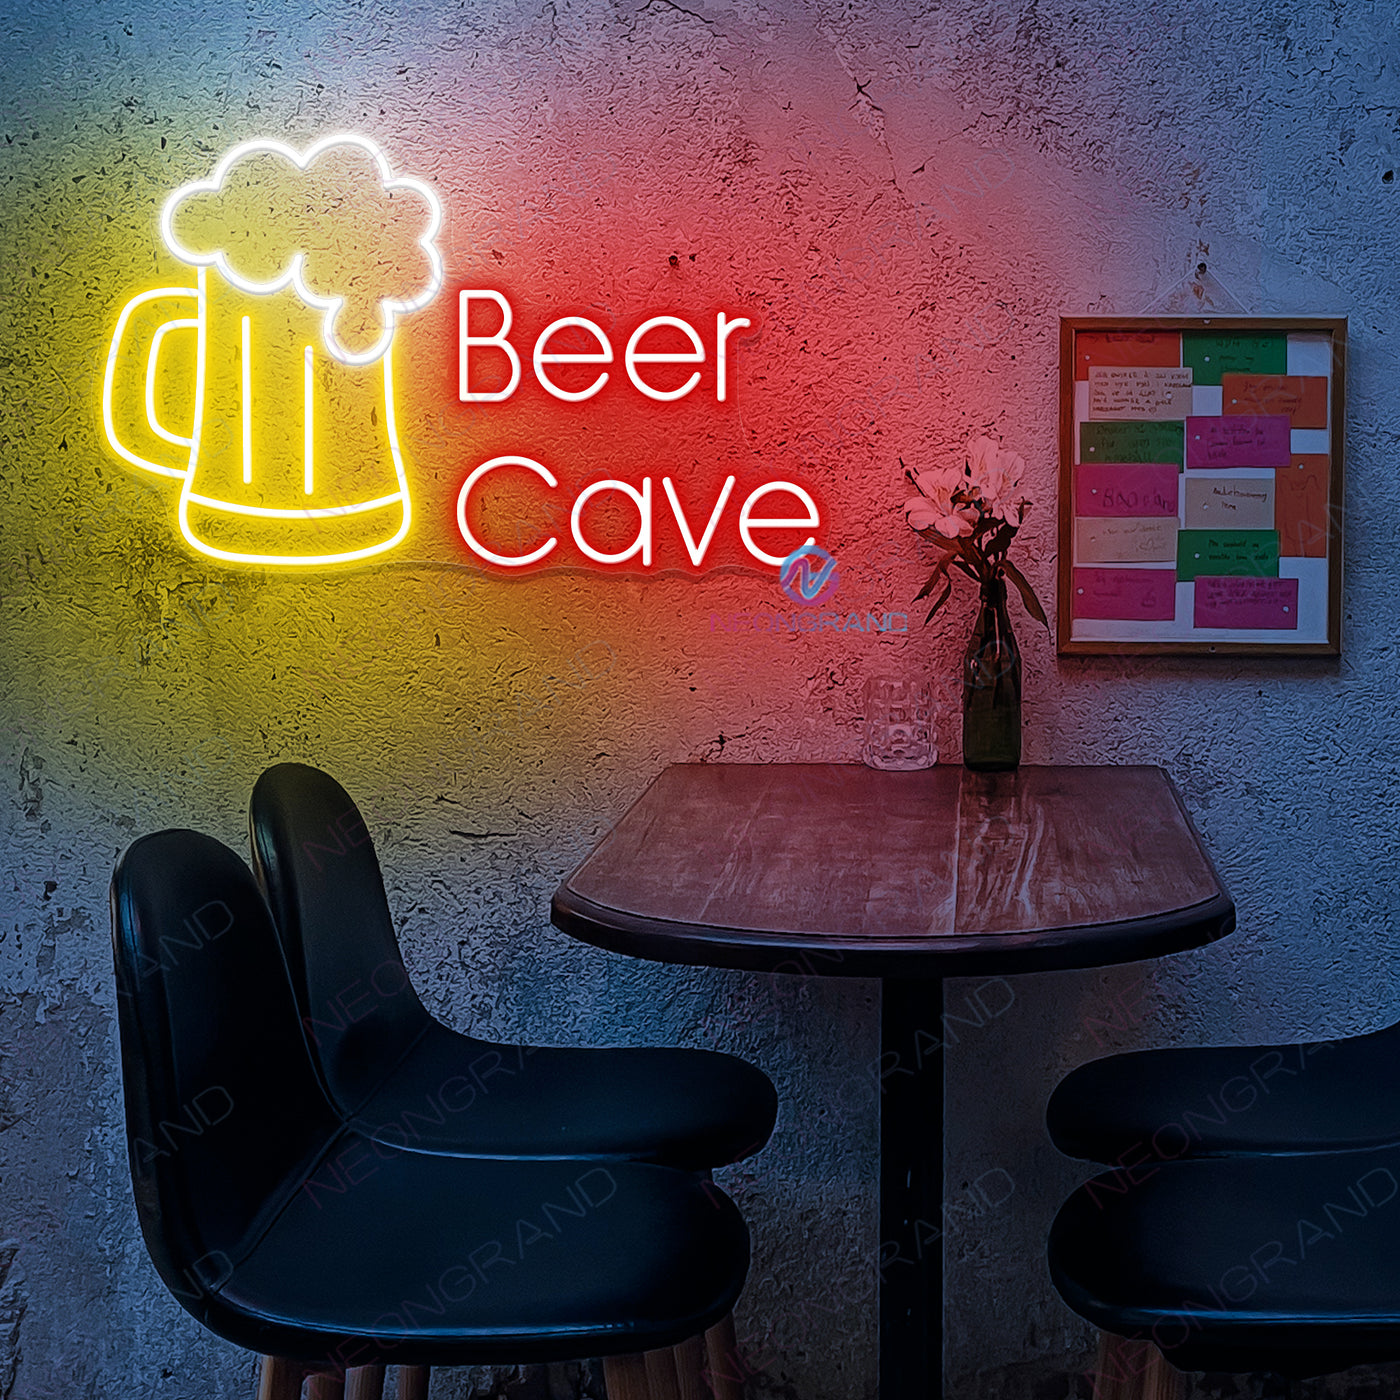 Beer Cave Neon Sign Led Light